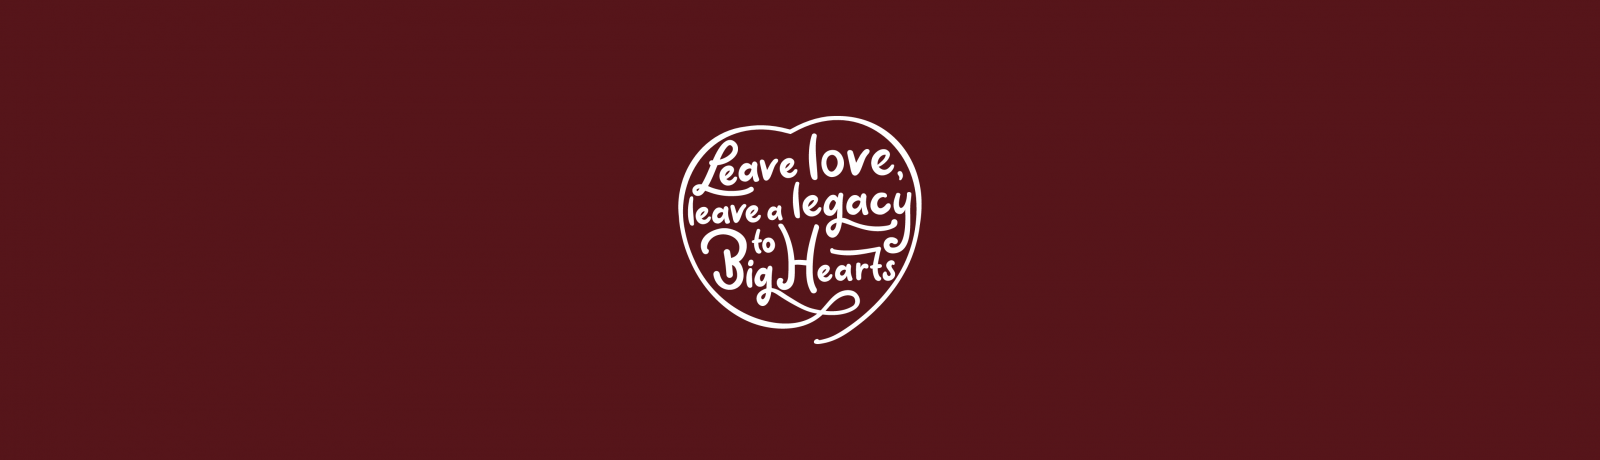  » Leave a gift in your will to Big Hearts